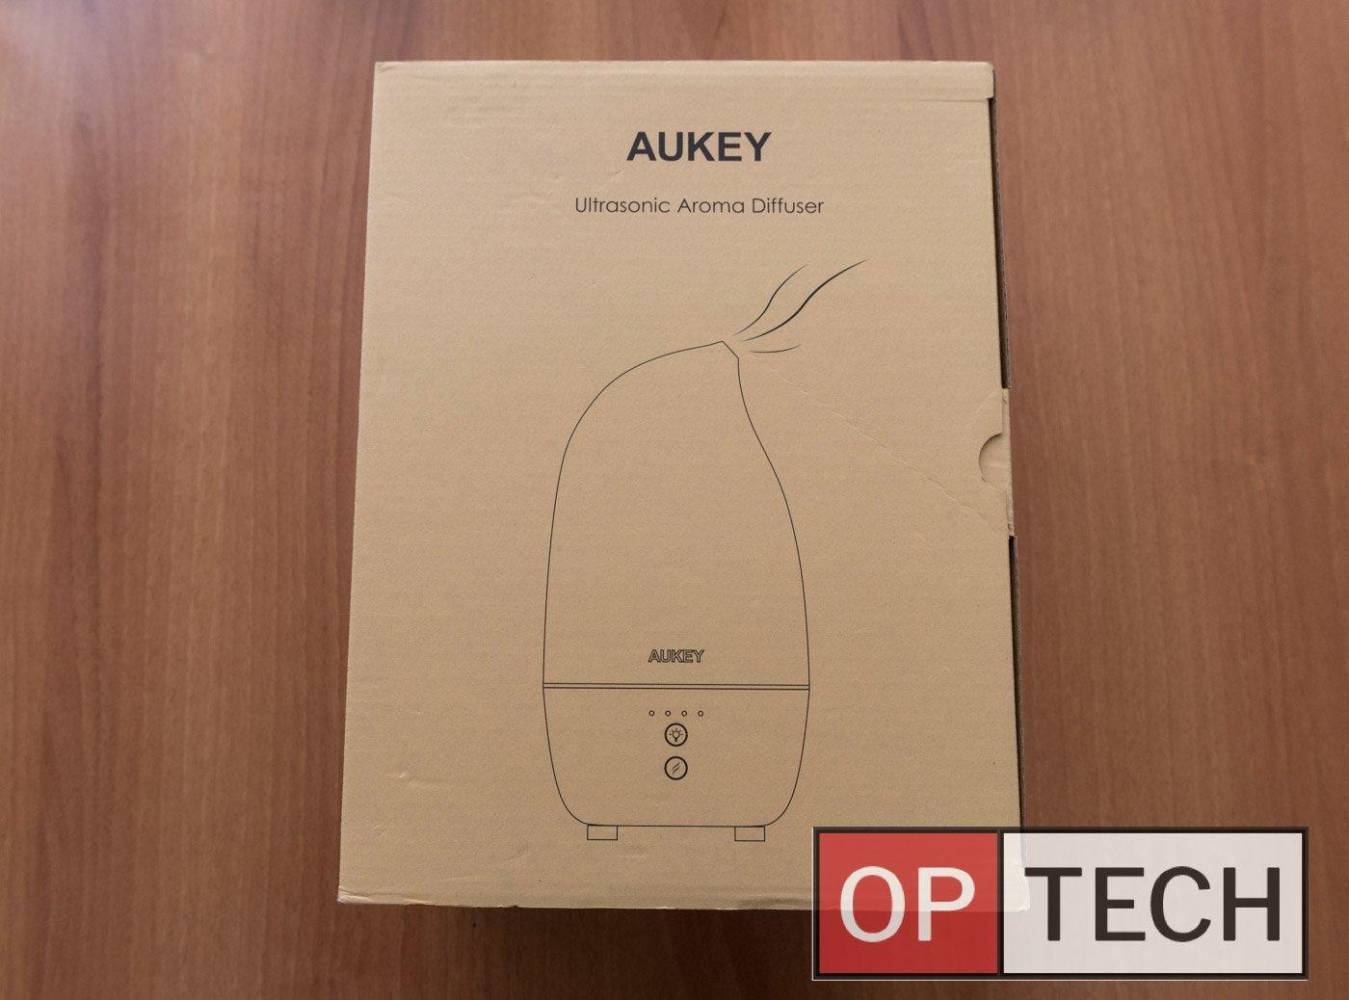 AUKEY BE-A6 unboxing